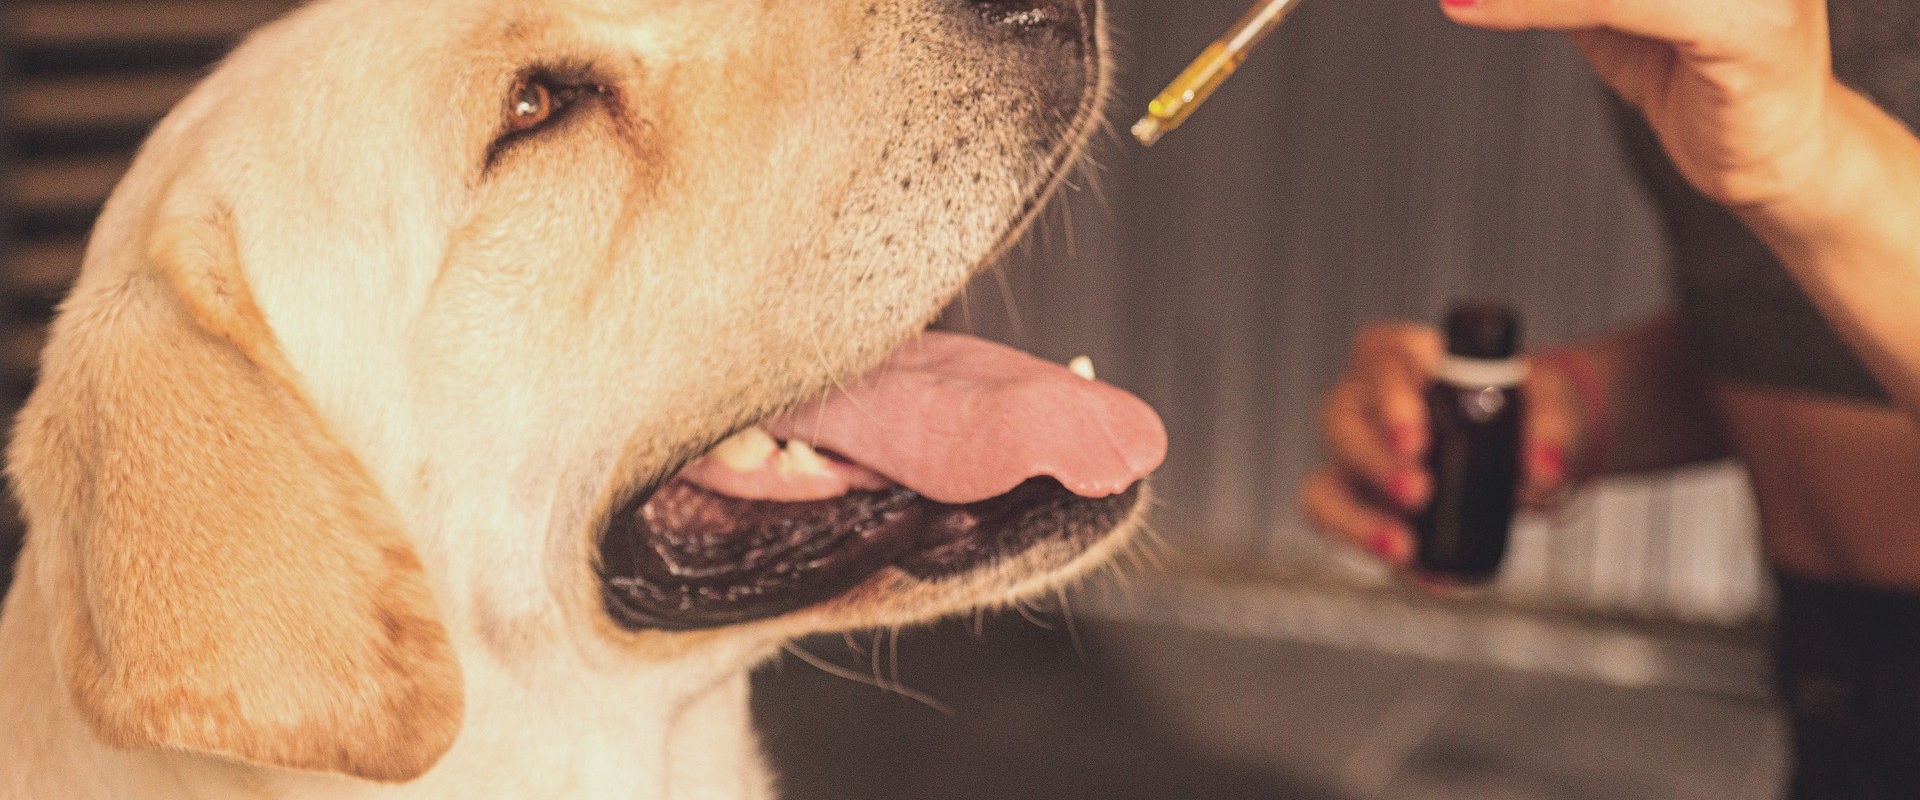 Is cbd and thc good for dogs?